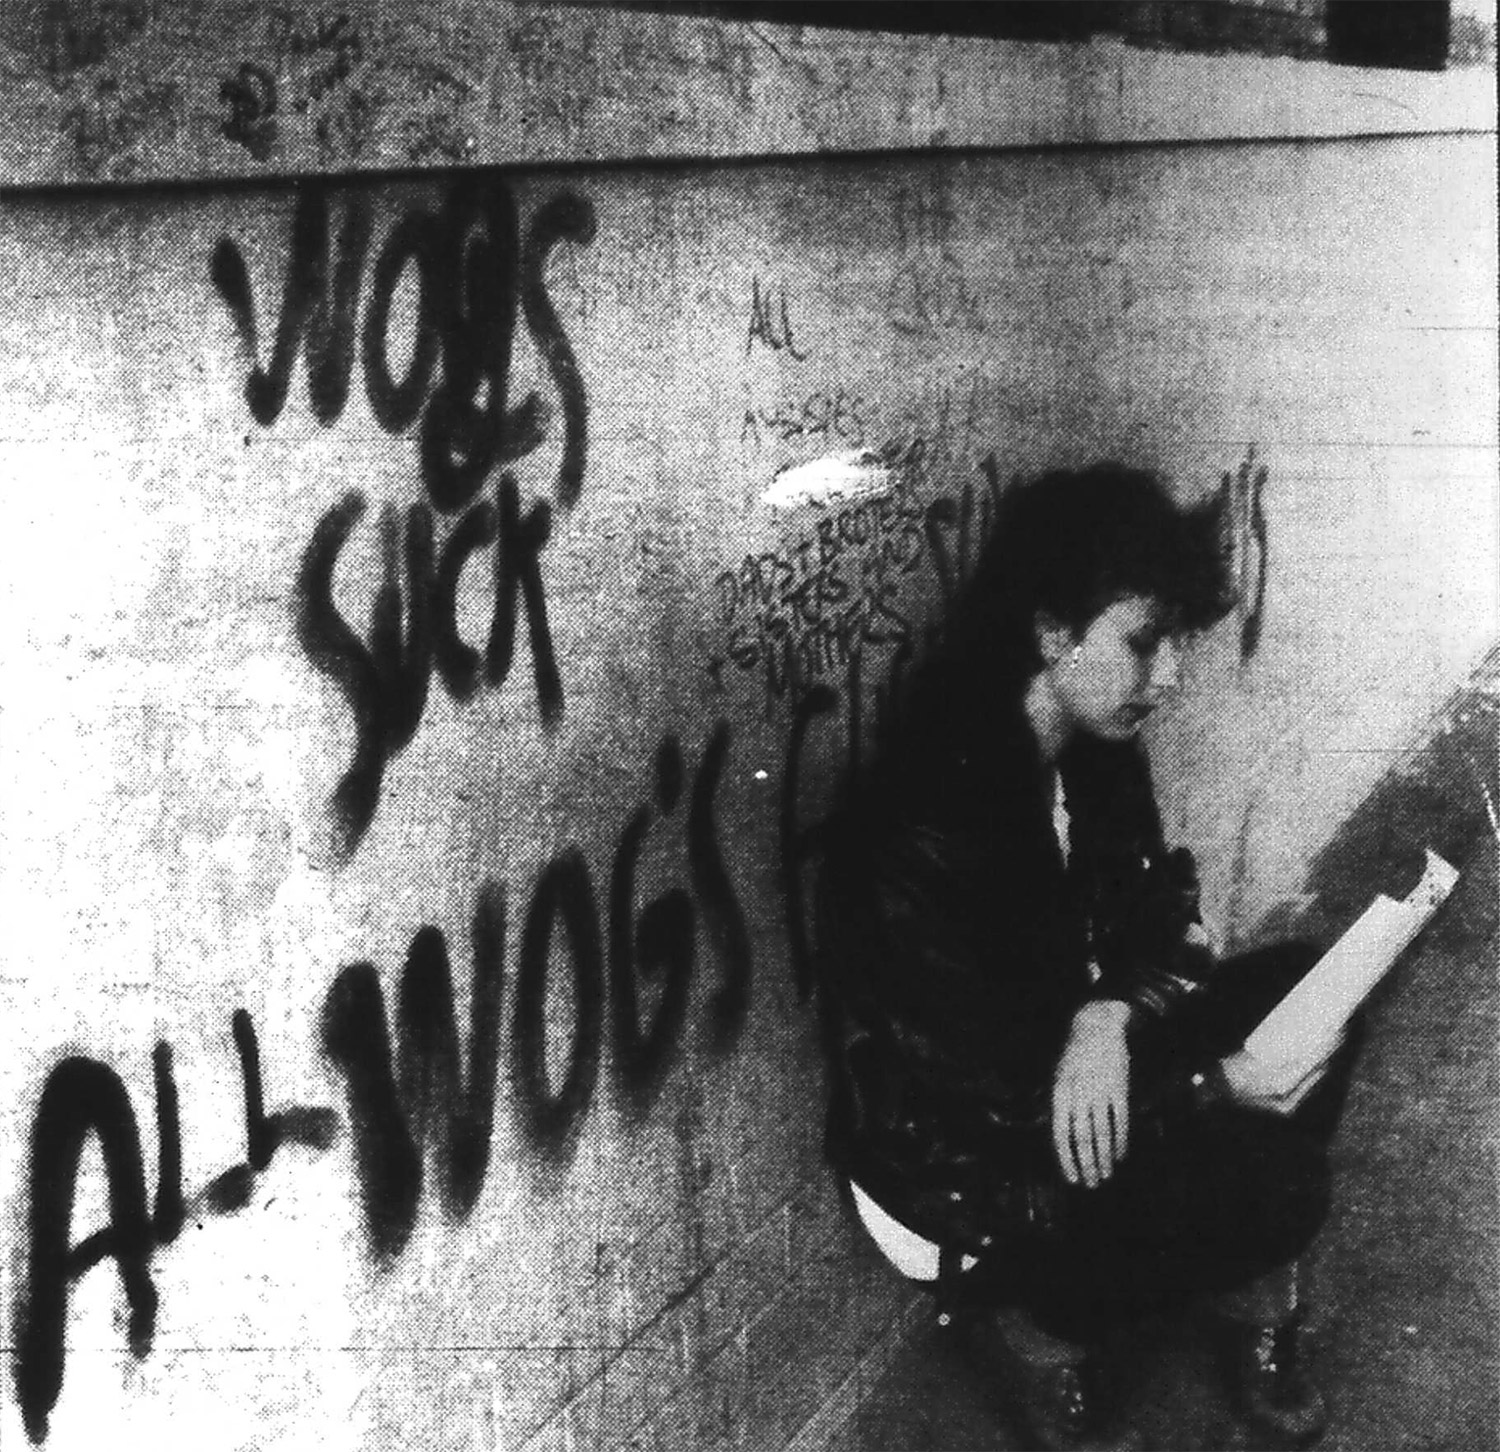 Jo Abbatangelo, Member of Ethnic Youth Issues Network, beside racist graffiti, as appeared in Talbot D. 1989. ‘Increase in racist violence’, Coburg Courier, 25 April 1989, p1.